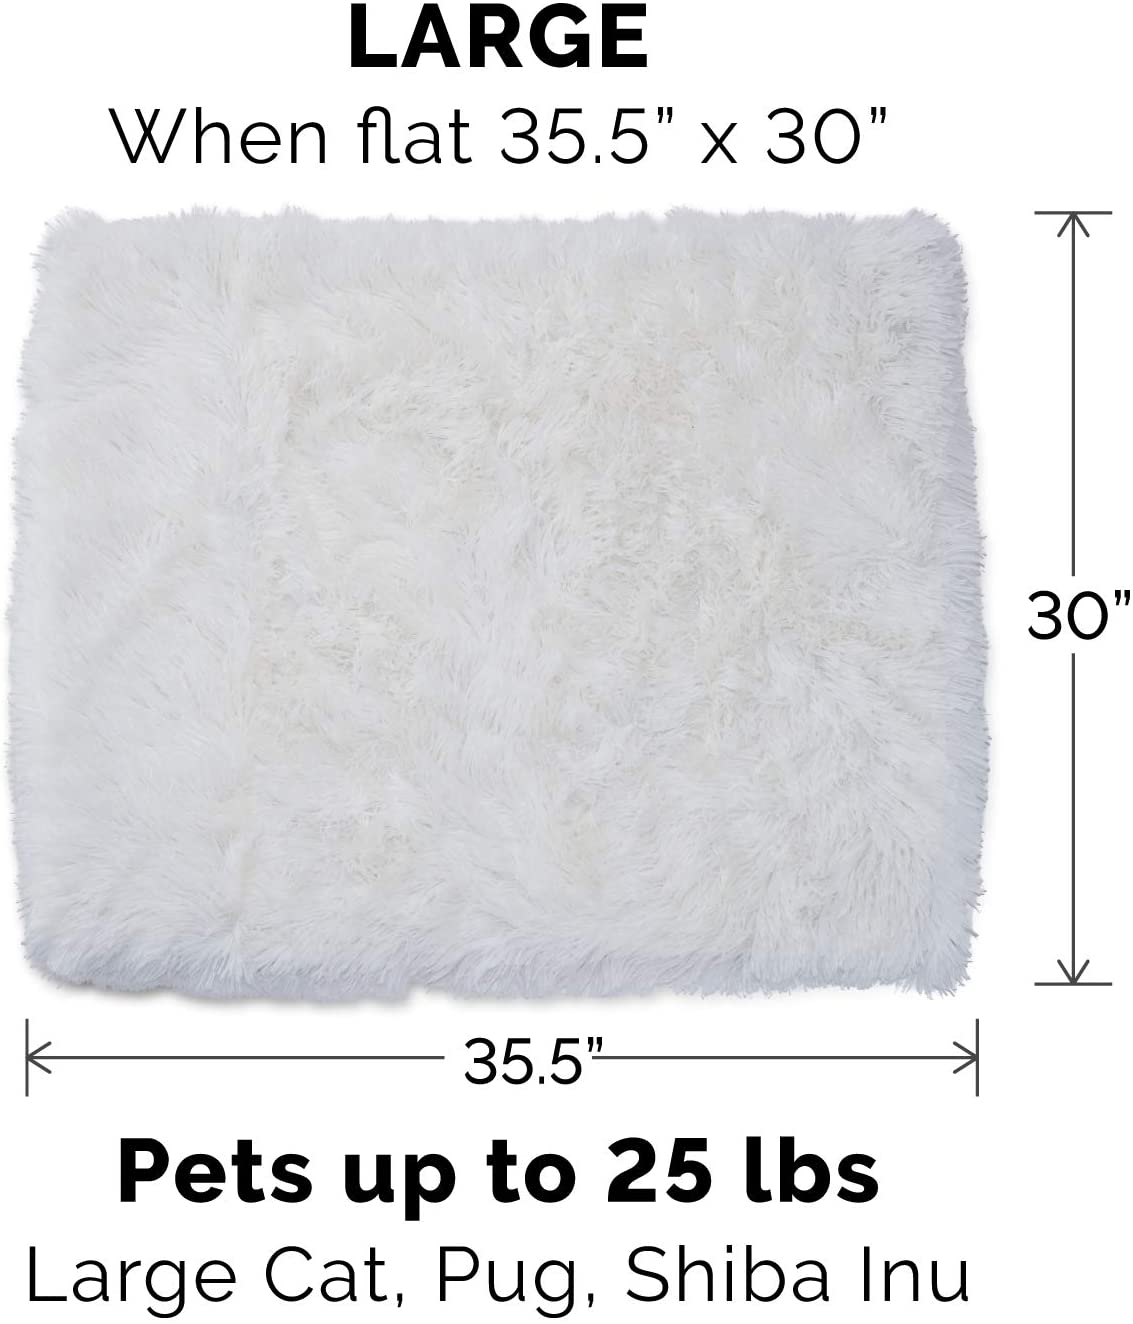 Furhaven Pet - ThermaNAP Self-Warming Quilted Blanket Mat, Self-Warming Convertible Cuddle Bed, and Waterproof-Lined Thermal Dog Blanket for Dogs and Cats - Multiple Styles, Sizes, and Colors